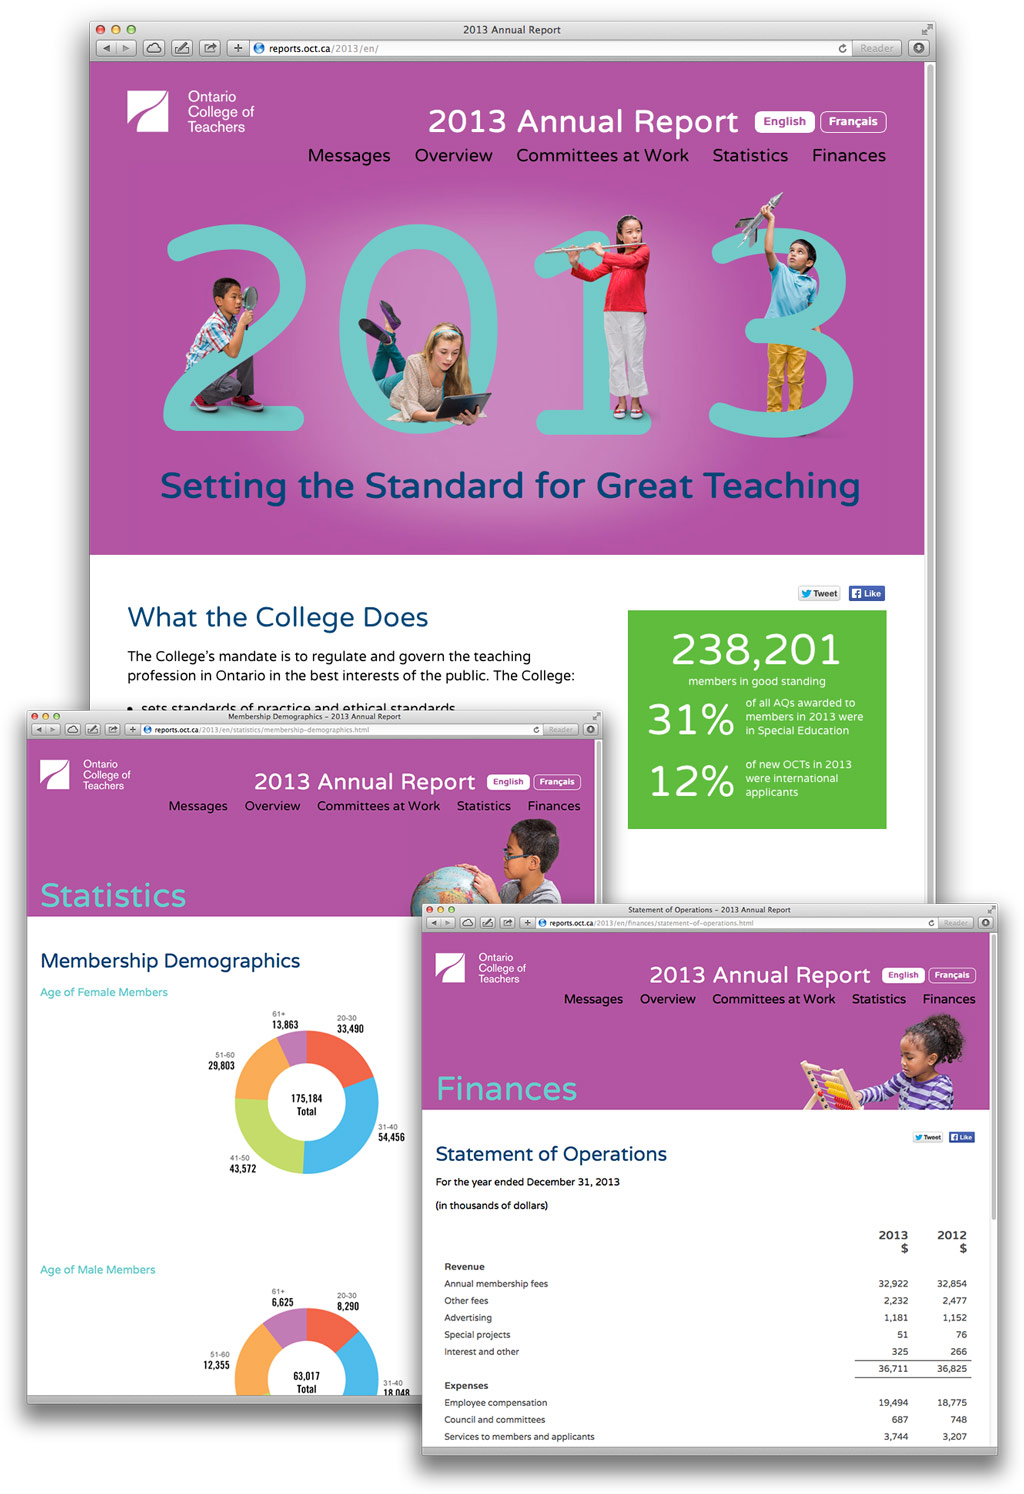 Annual Report for the Ontario College of Teachers